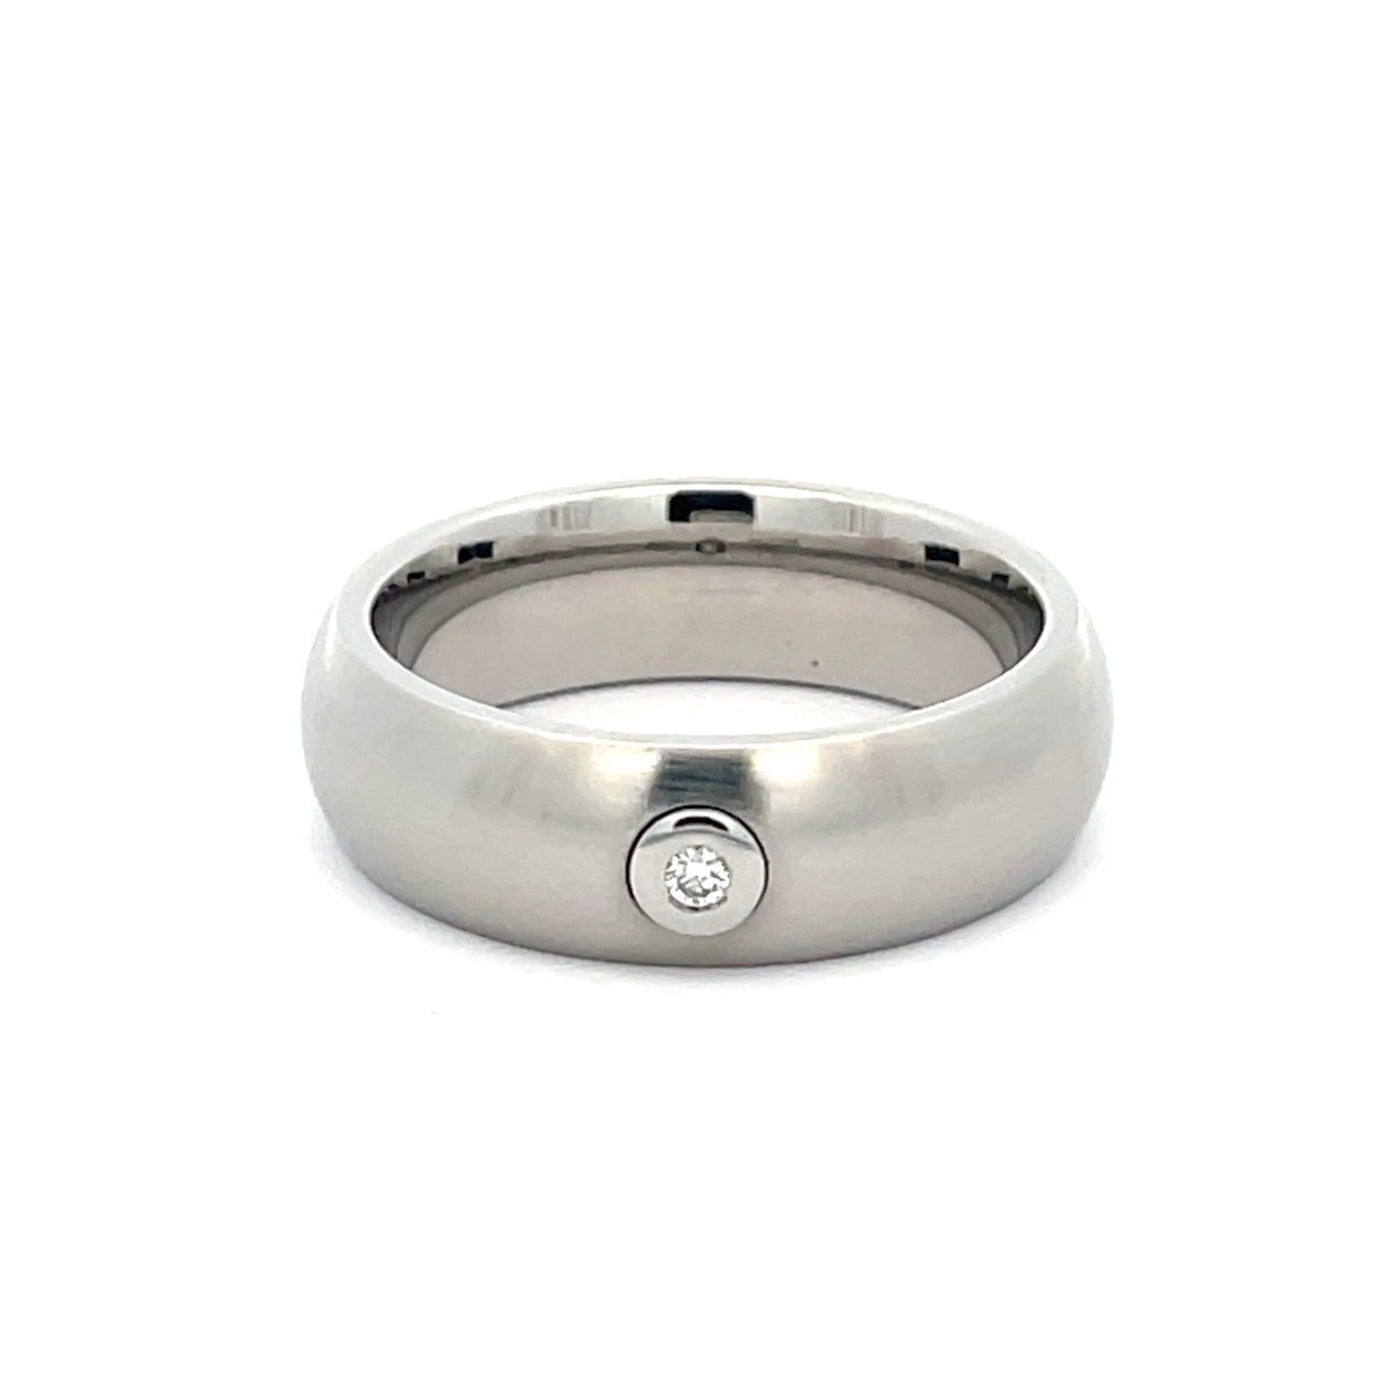 7mm Stainless Steel Single Diamond Ring - Size S 1/2